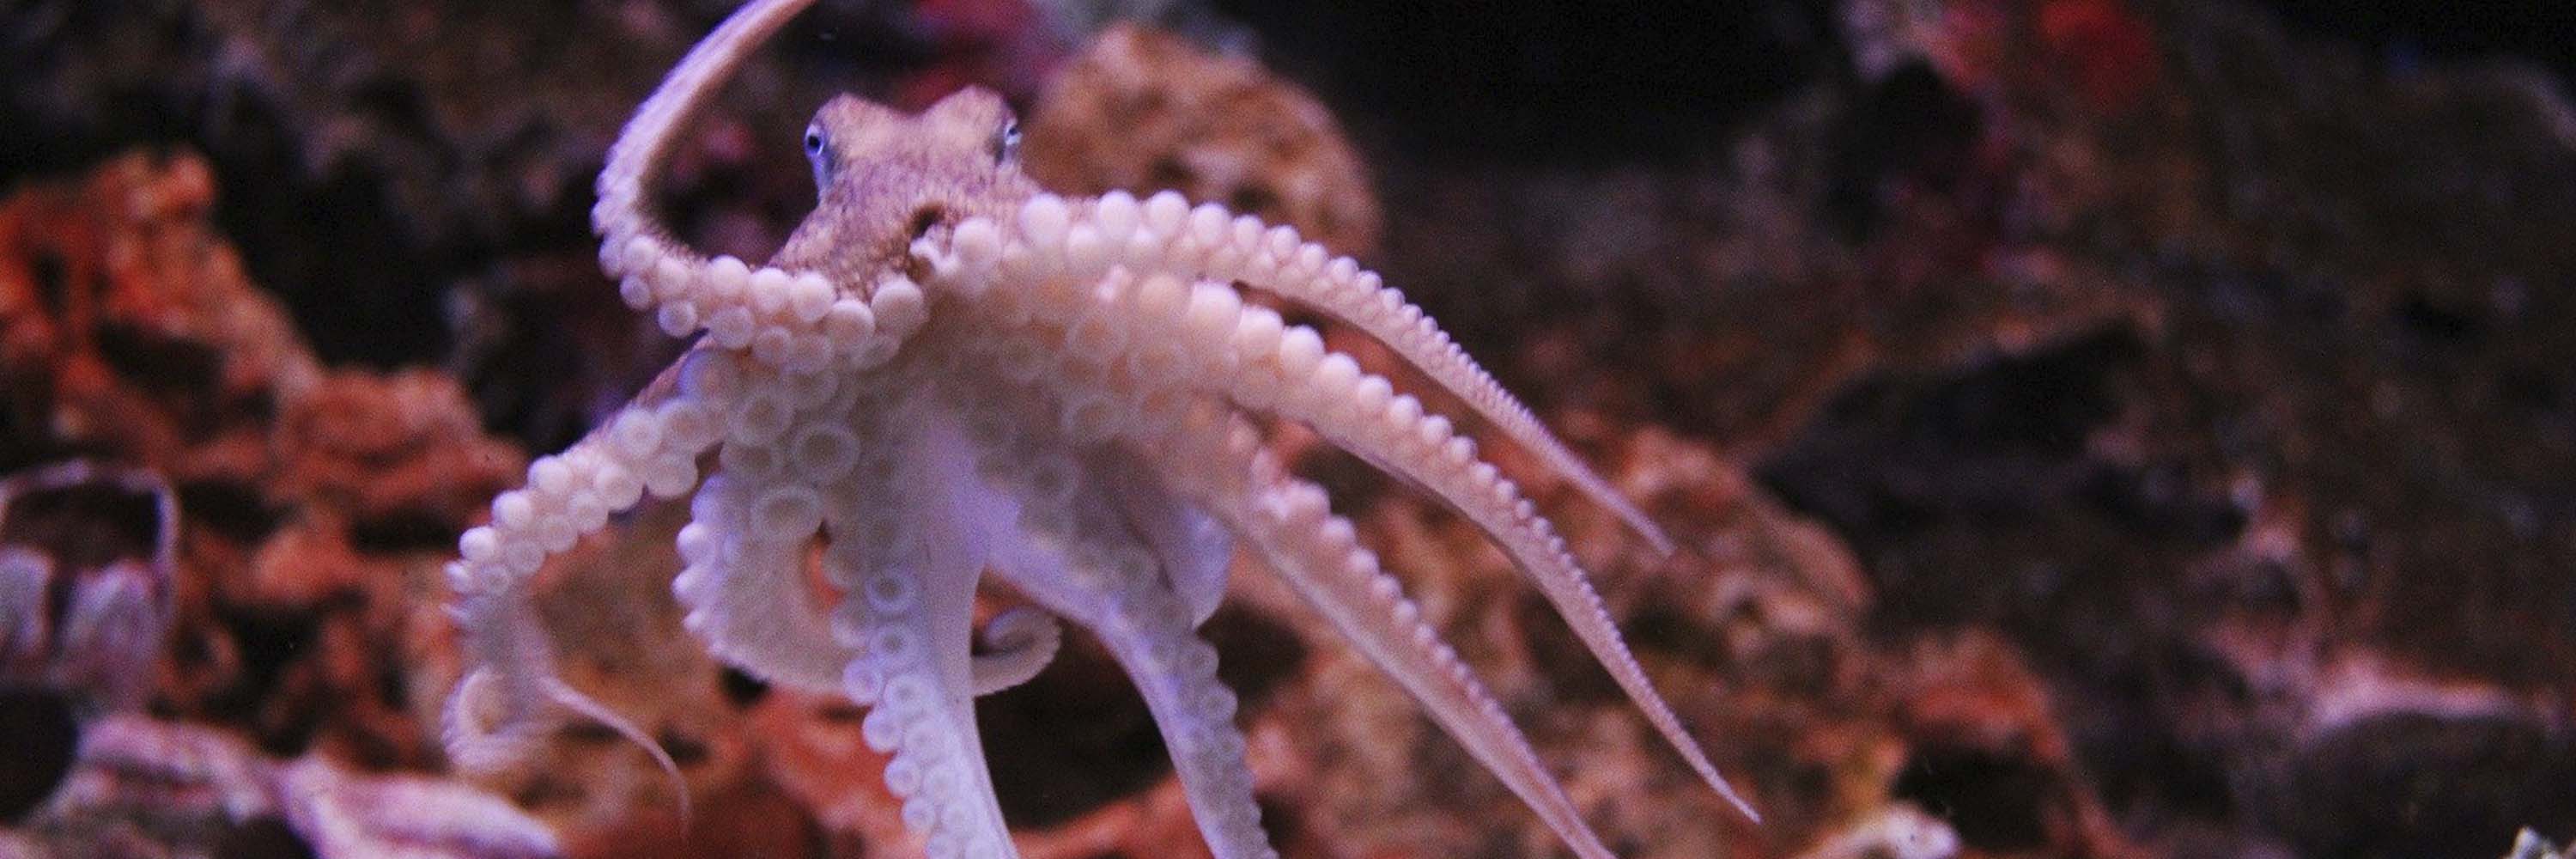 Terrestrial plant,Reef,Close-up,giant pacific octopus,Invertebrate,Macro photography